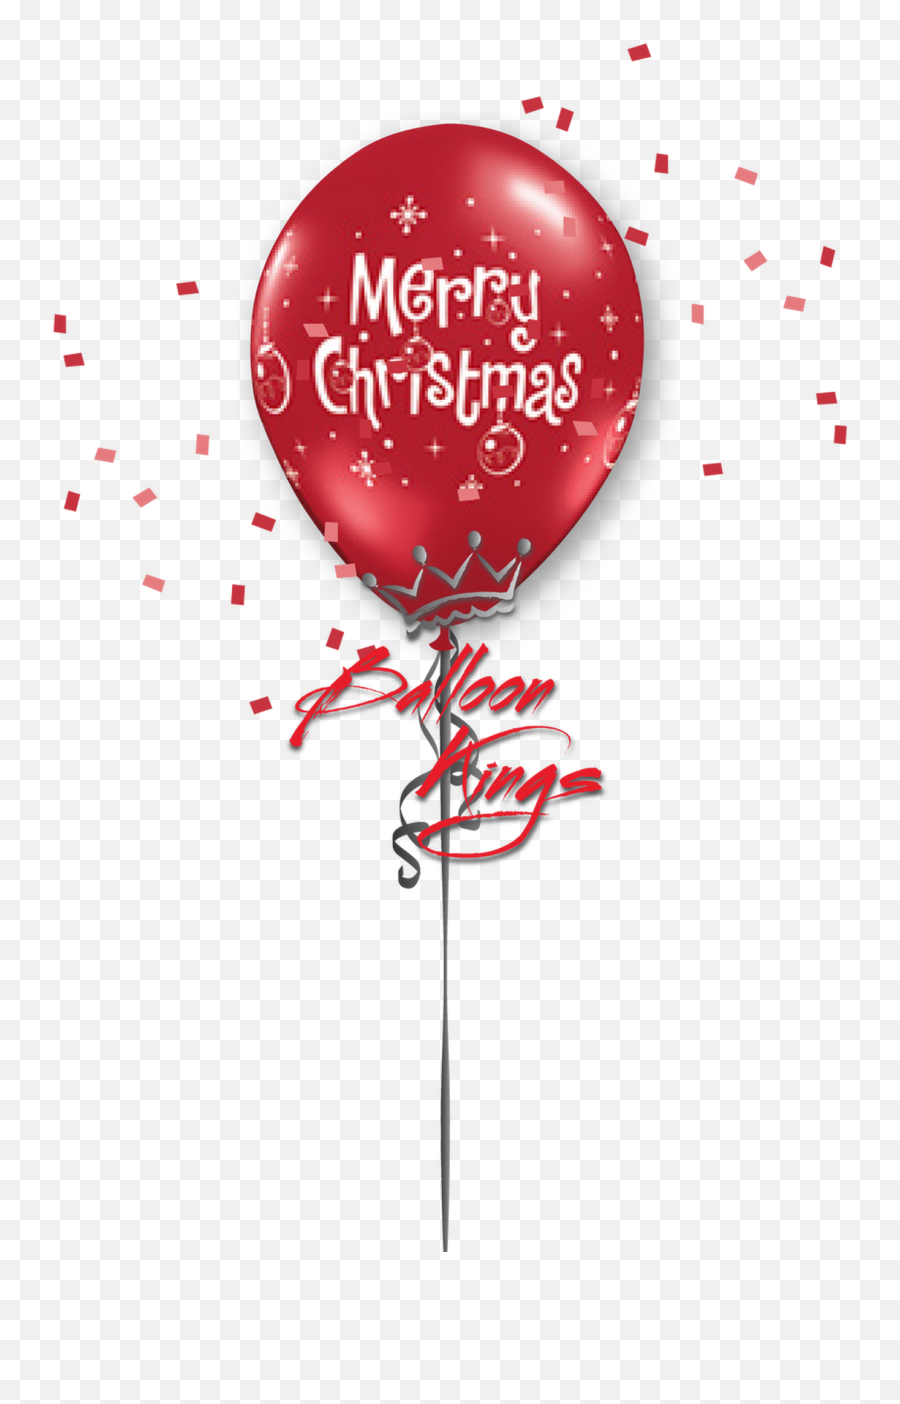 11in Latex Merry Christmas Ornaments - 11 In Double Hearts Red Balloons Kings Emoji,3 Red Balloons Emoji